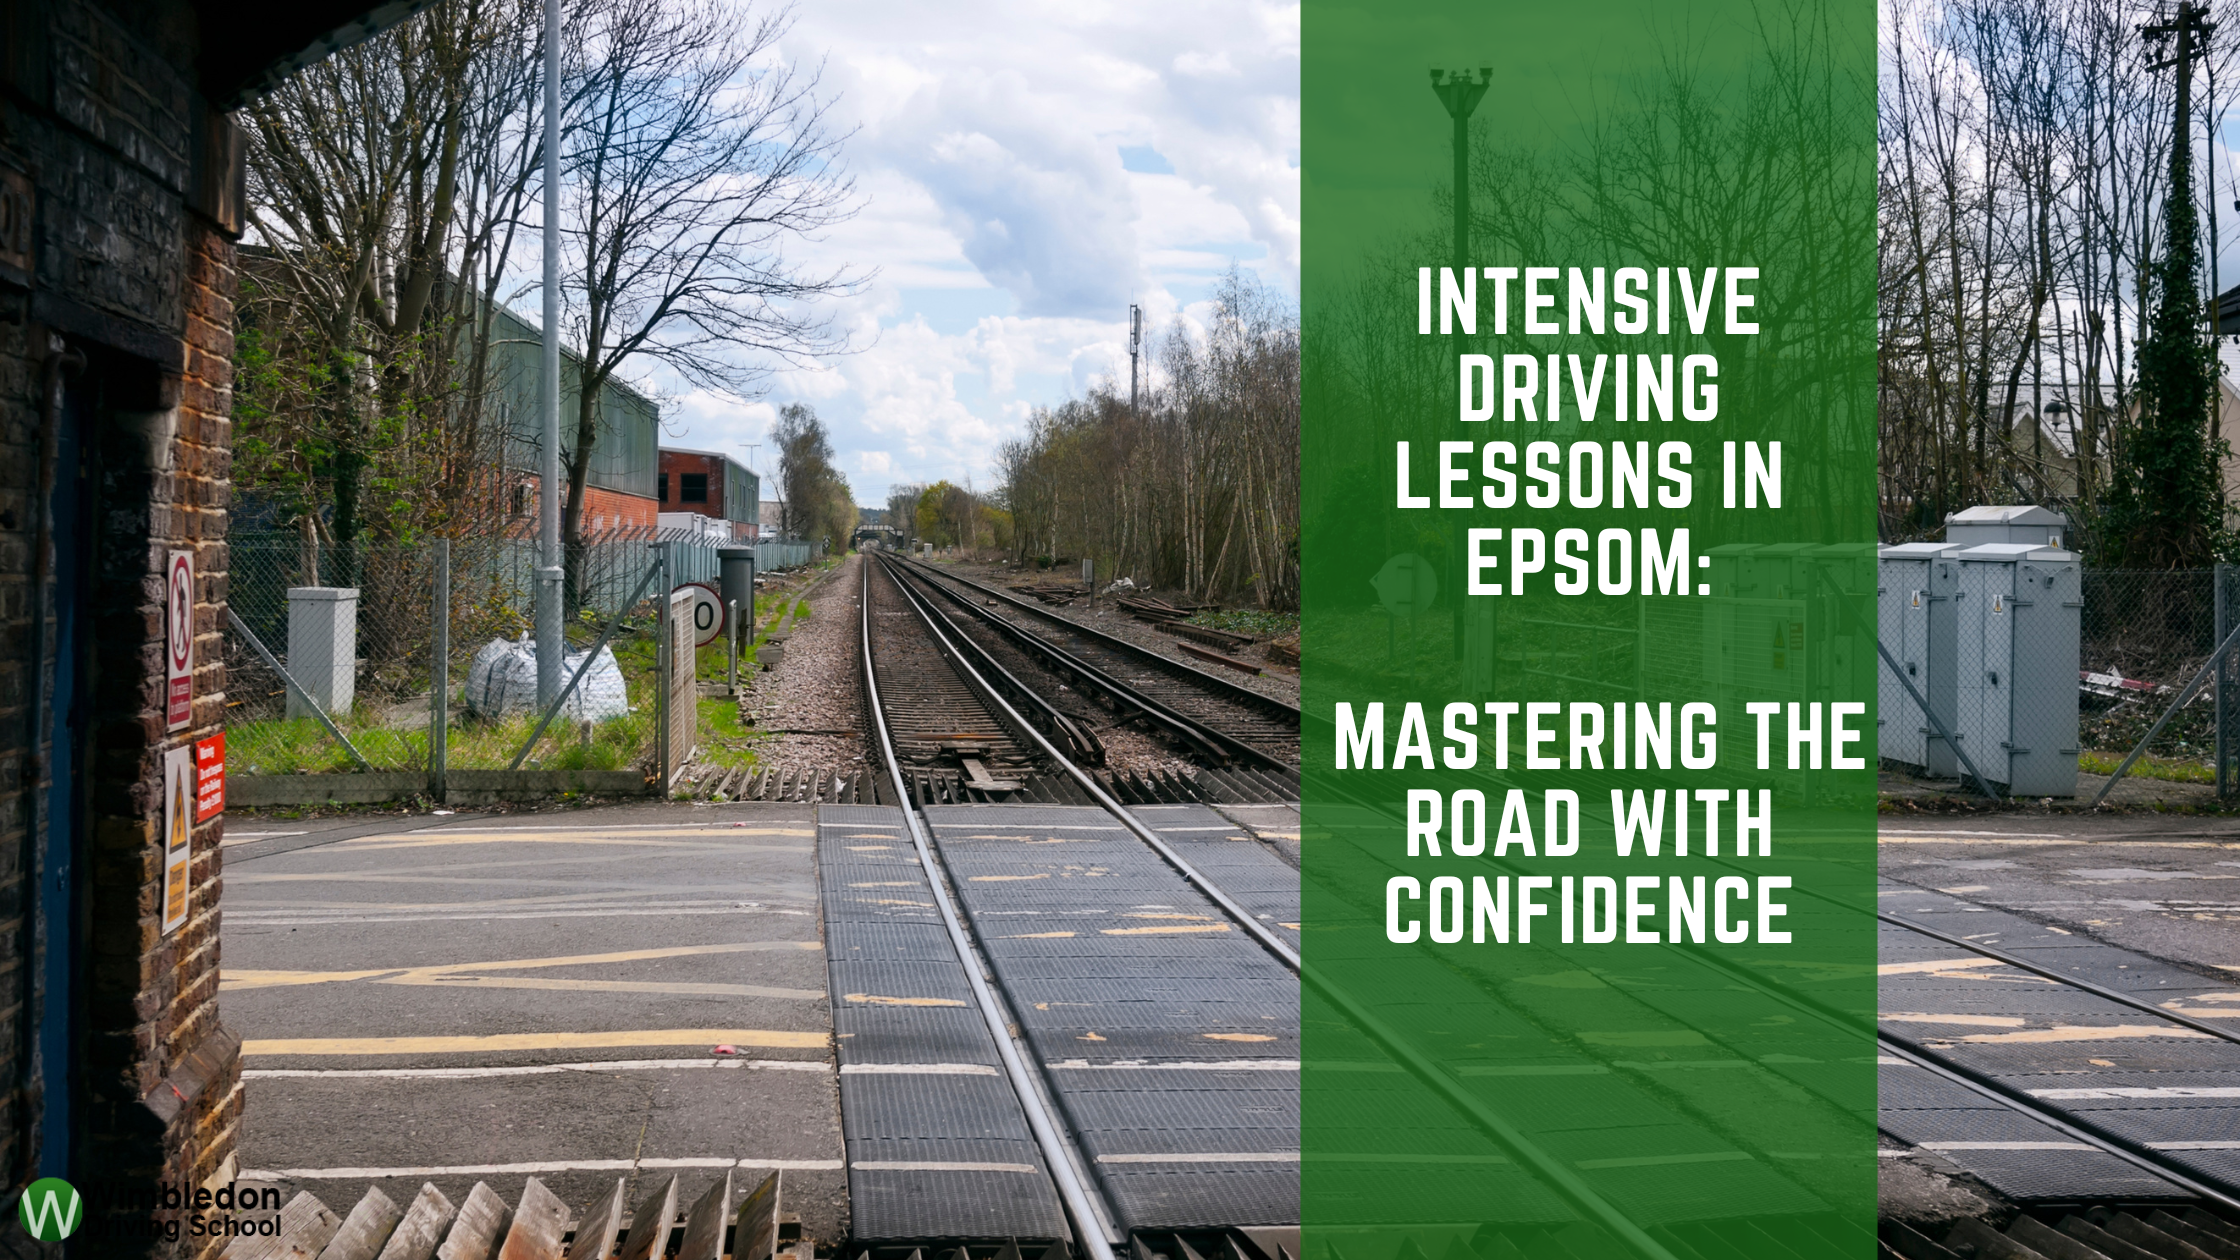 Intensive Driving Lessons in Epsom: Mastering the Road with Confidence